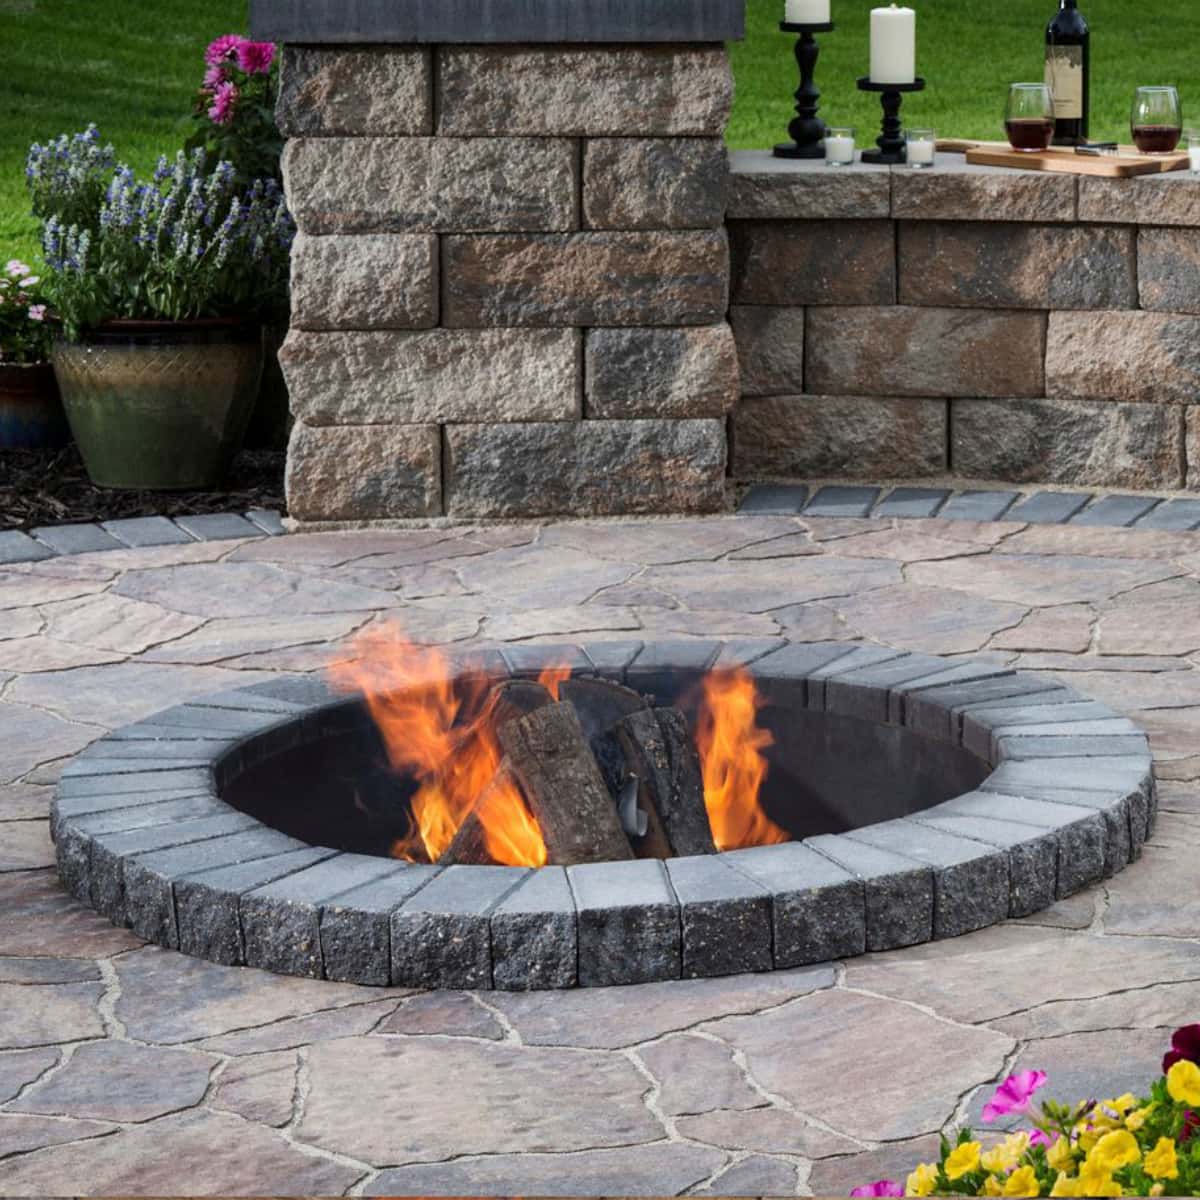 Are Backyard Fire Pits Legal Pit, Can I Dig A Fire Pit In My Backyard